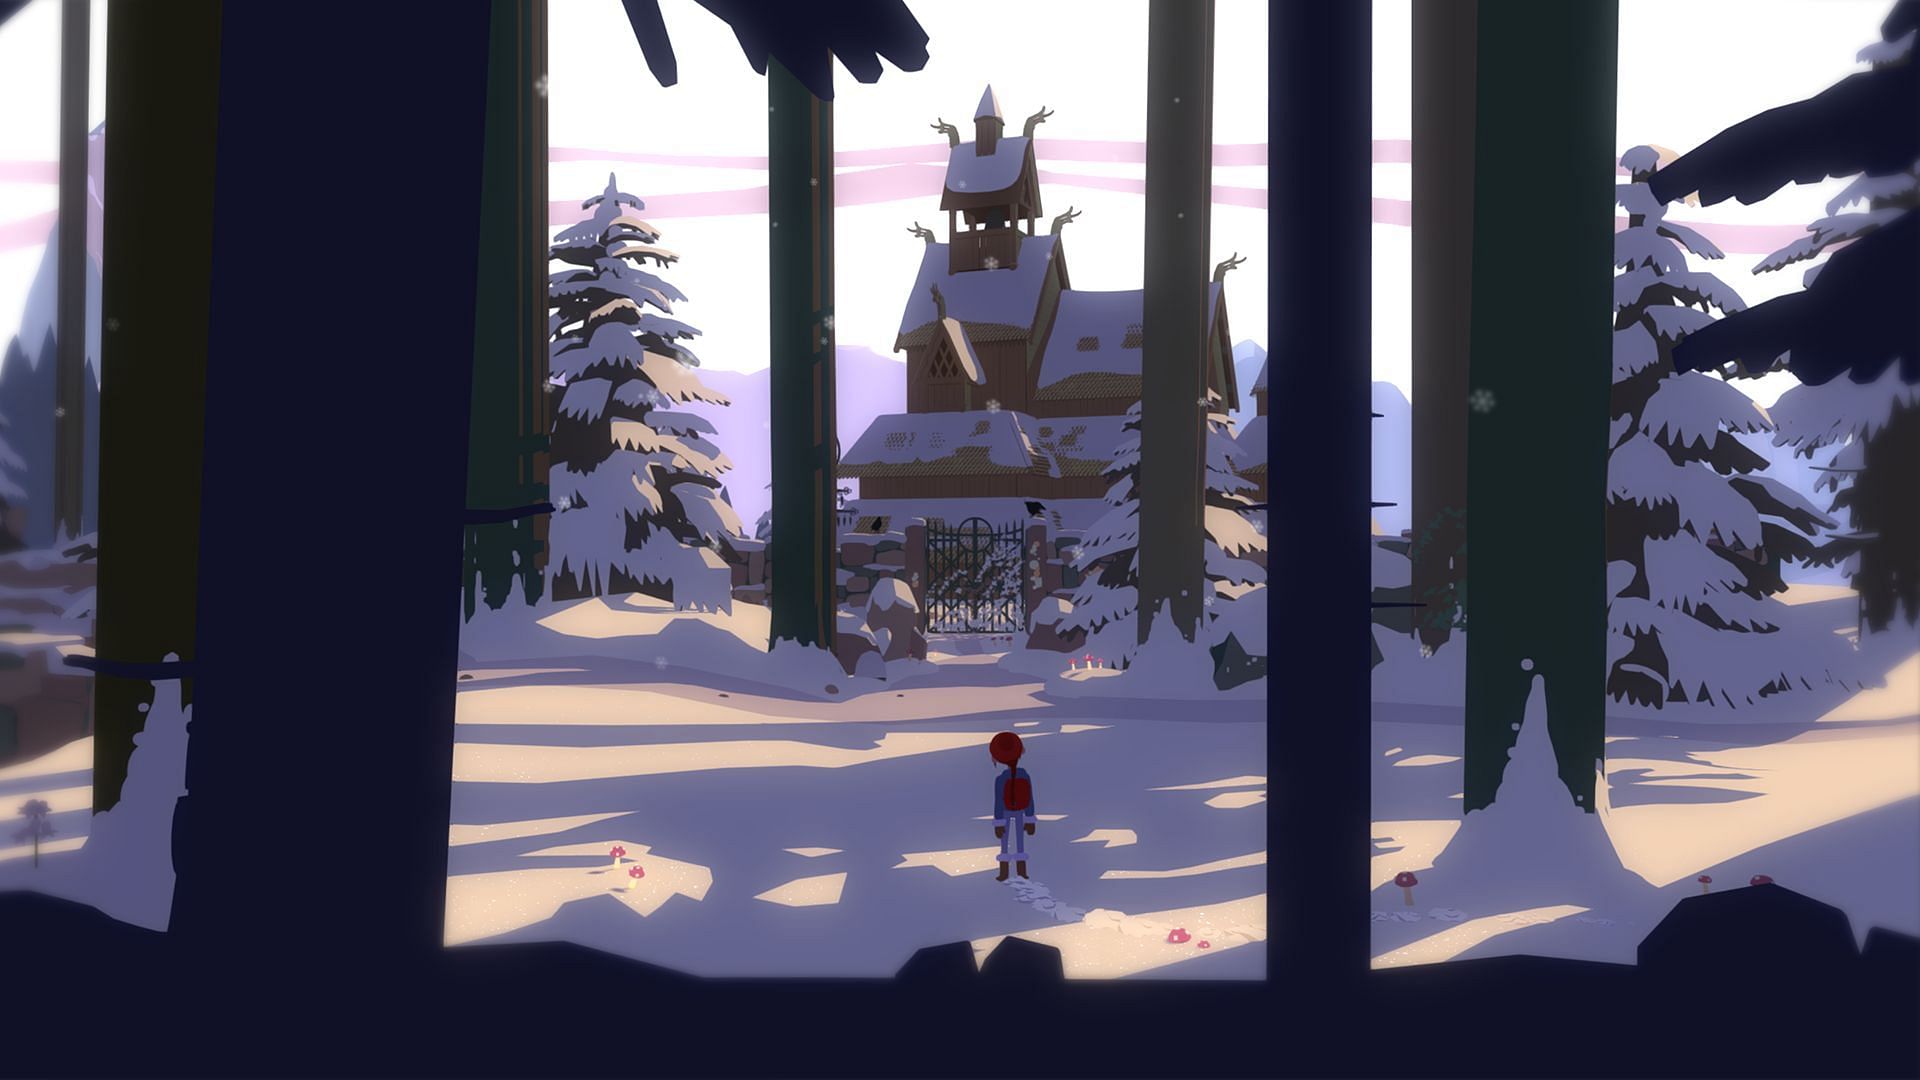 The world is full of wonders for Tove to explore. (Image via Polygon Treehouse)